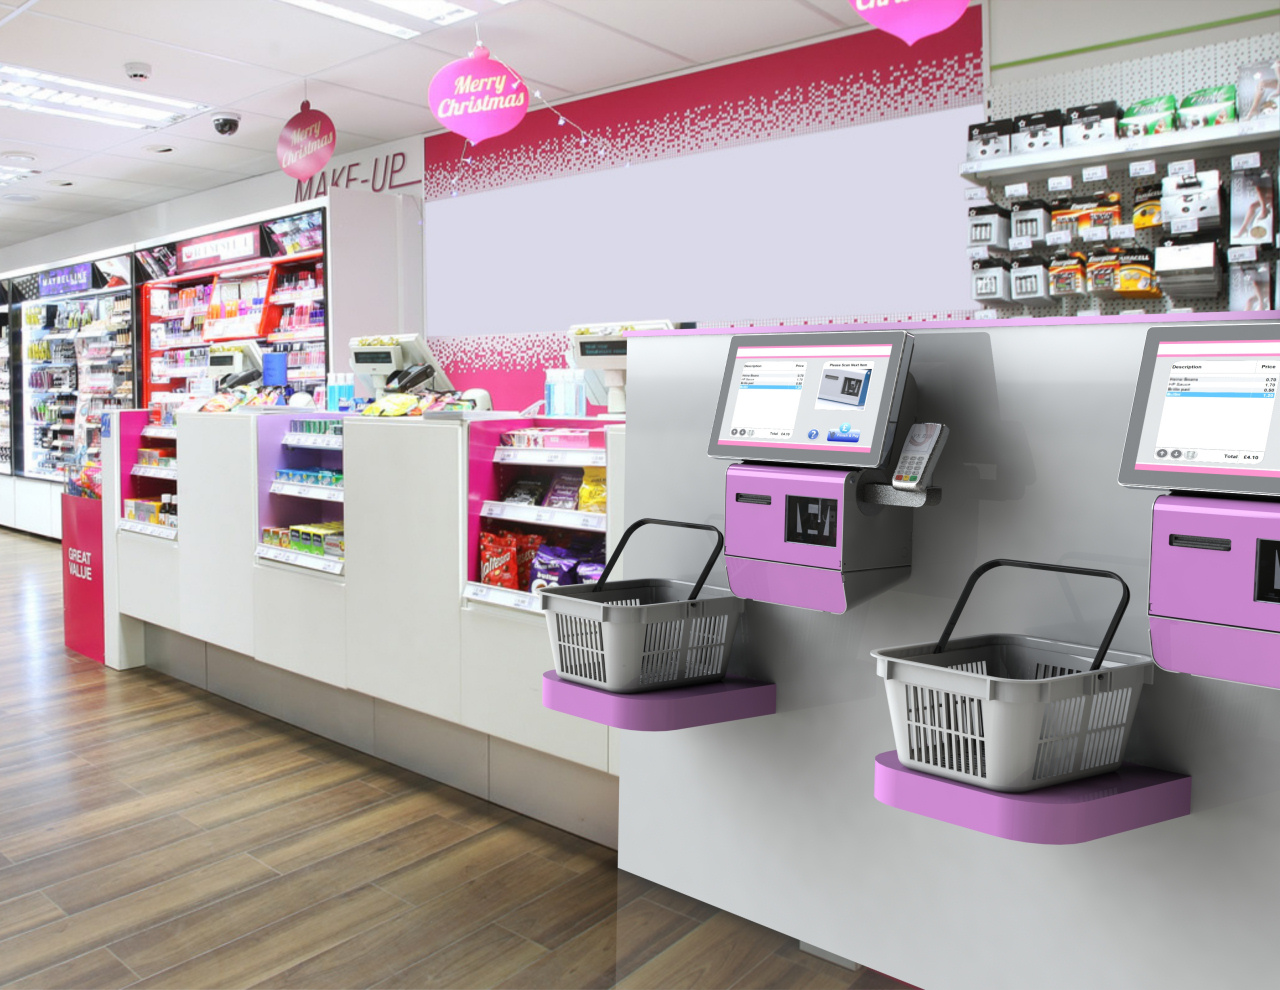 a prototype of a 2 self service digital kiosk in a retail environment for purchasing products